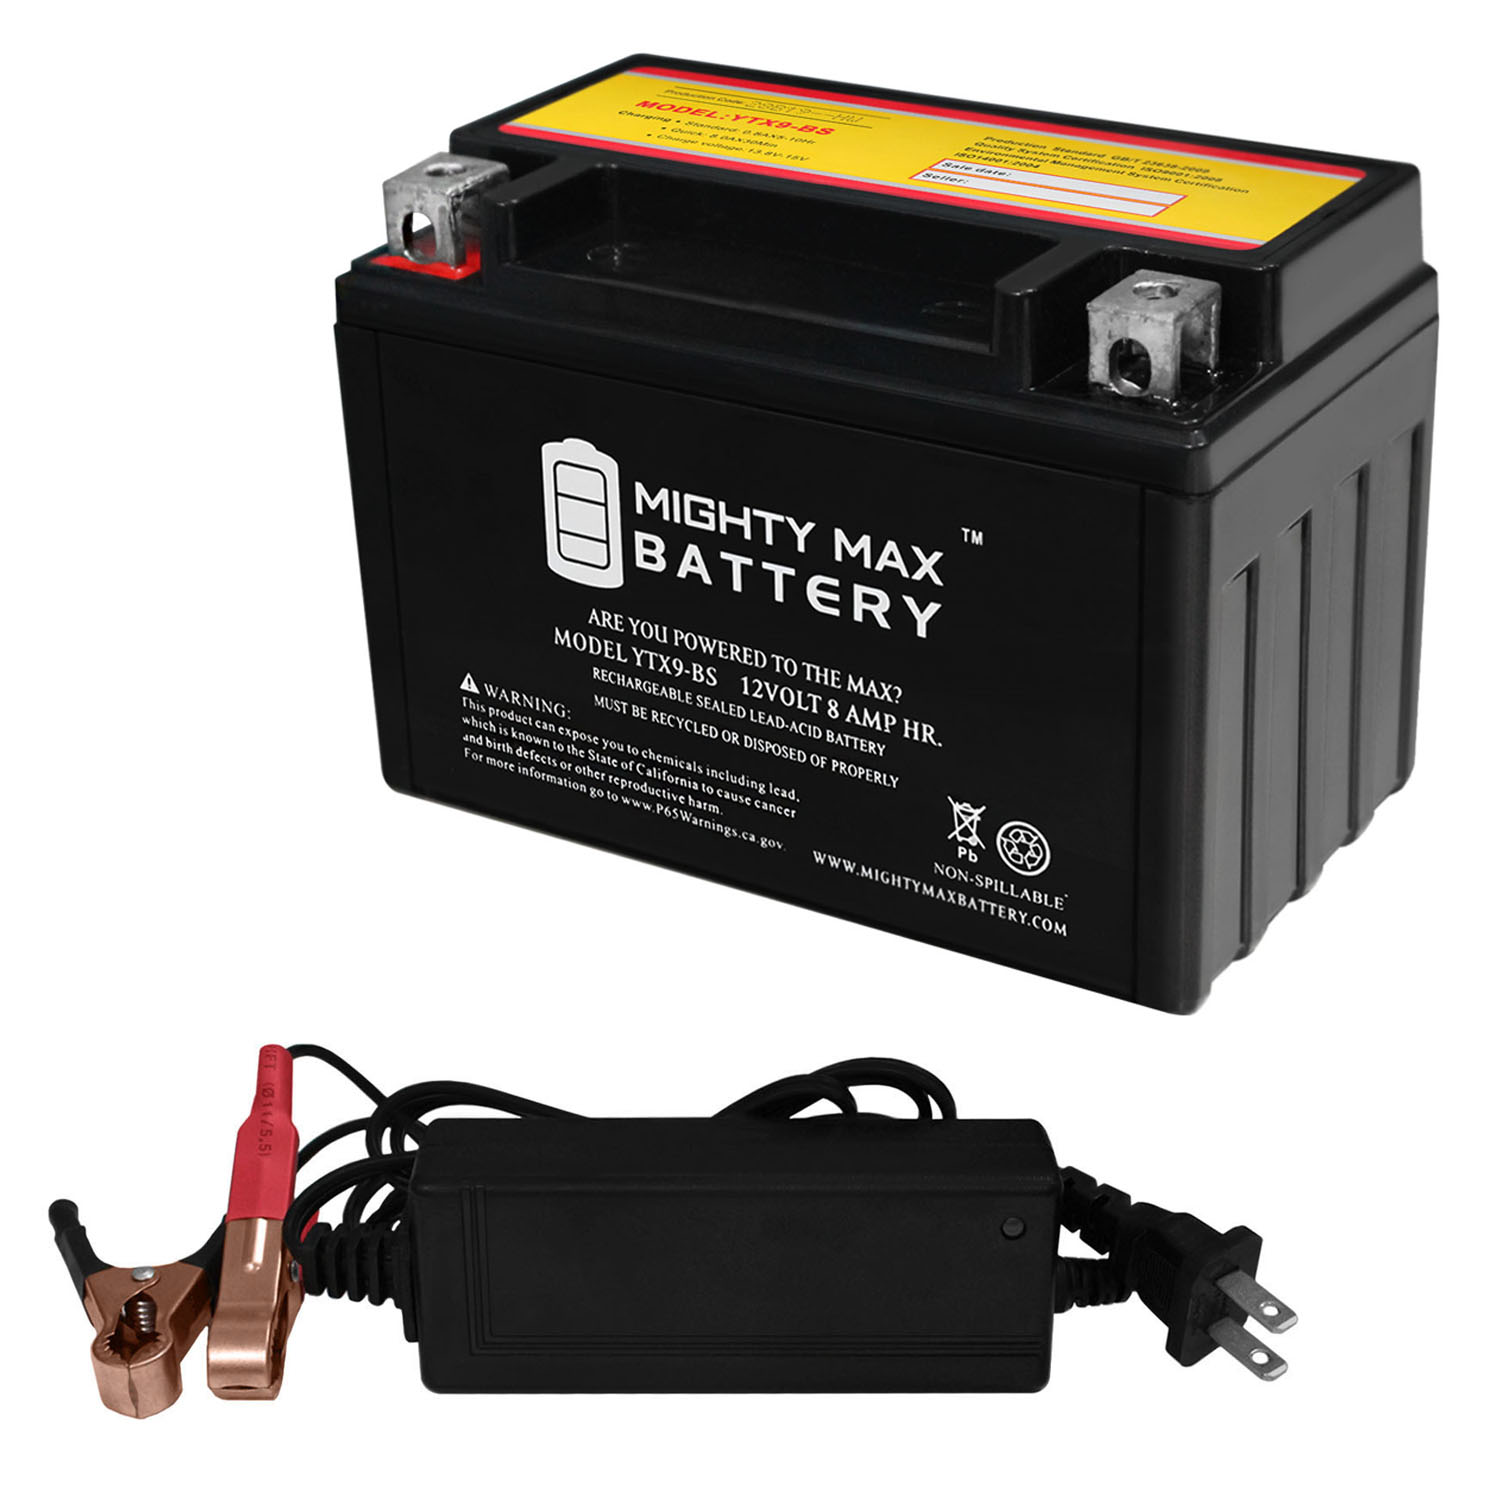 Mighty Max Battery YTX9-BS Battery for Honda 250 TRX250X, EX, 2001-13 + 12V 2Amp Charger